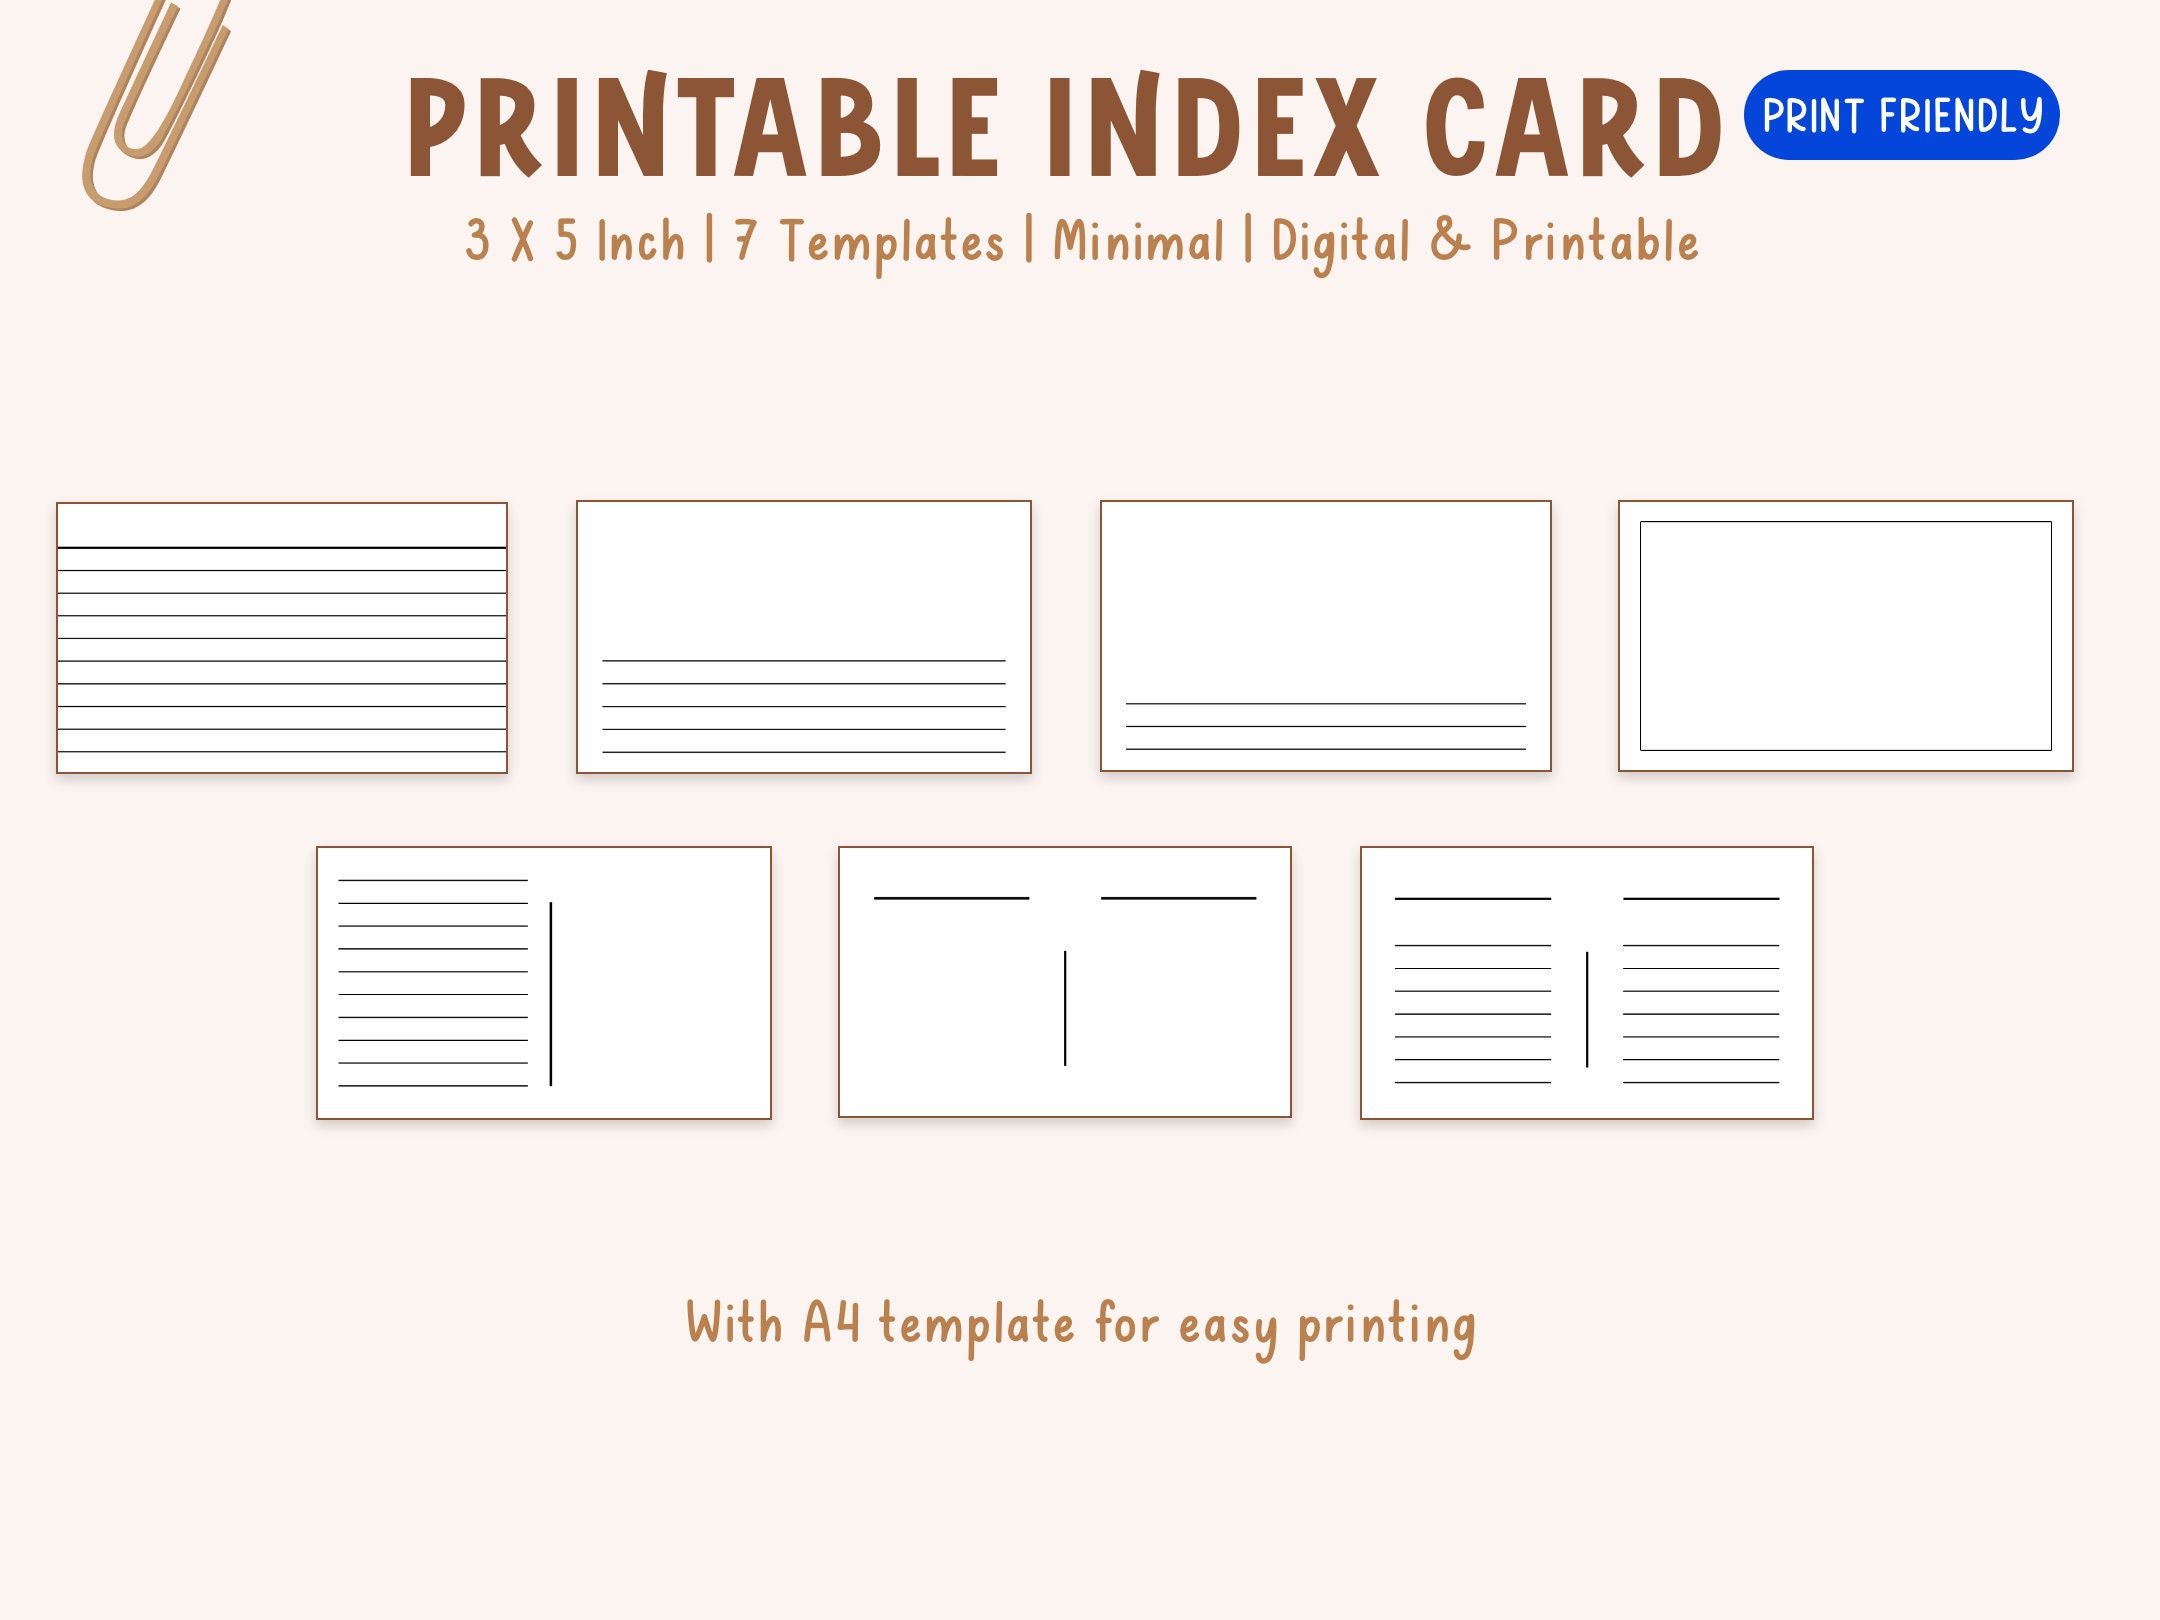 Colored Index Card Clipart / Index Card Image / Index Card Png